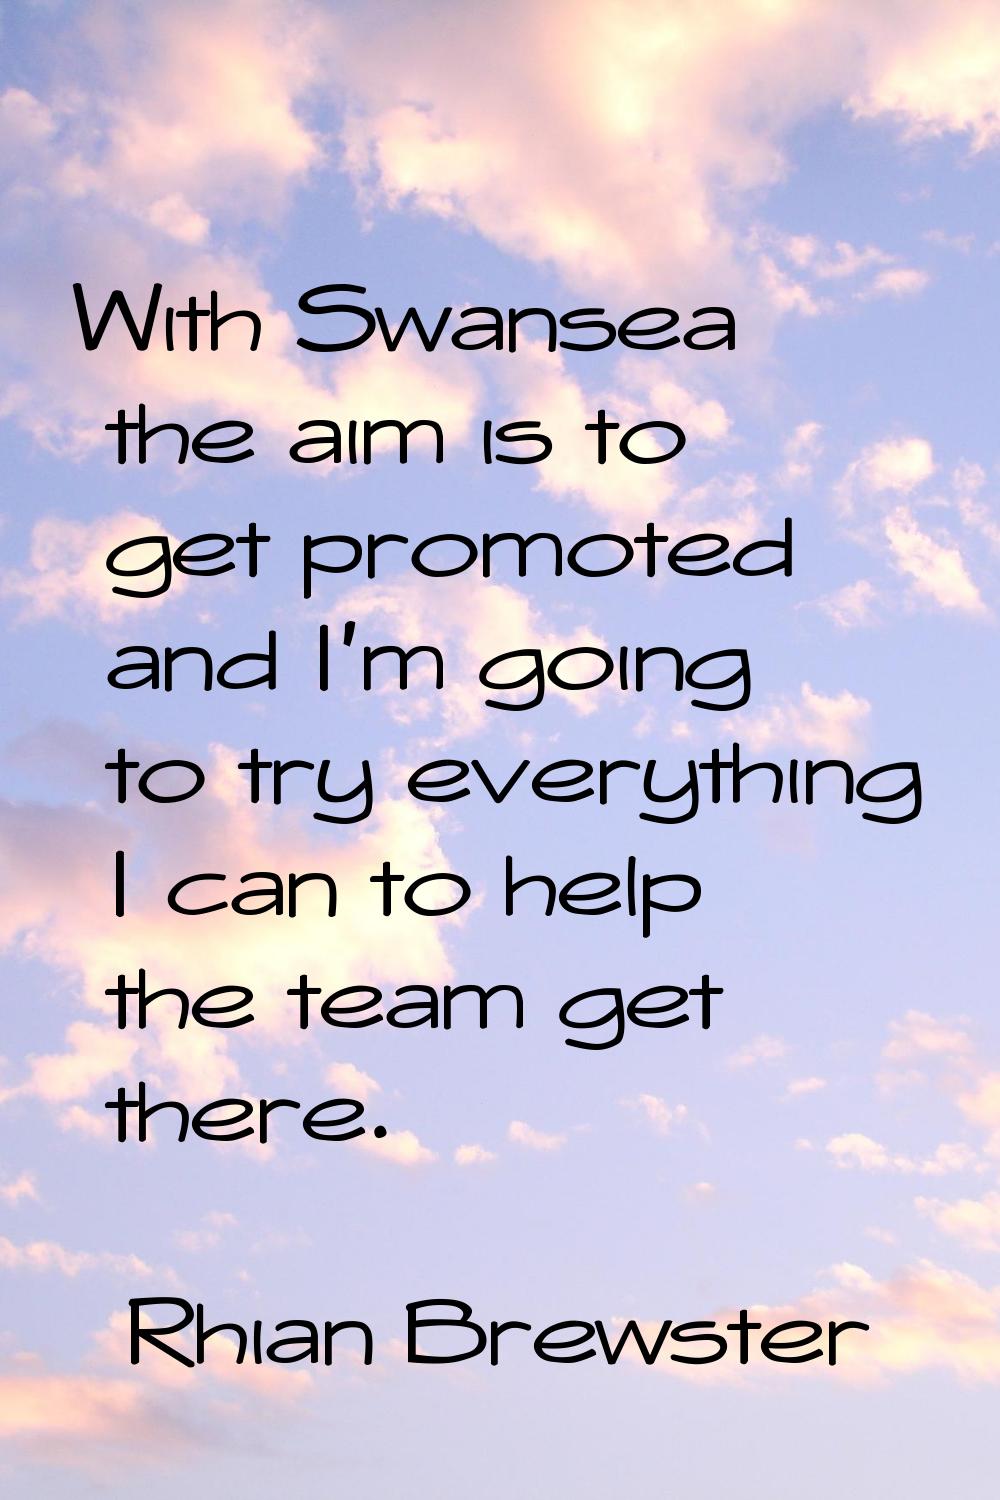 With Swansea the aim is to get promoted and I'm going to try everything I can to help the team get 